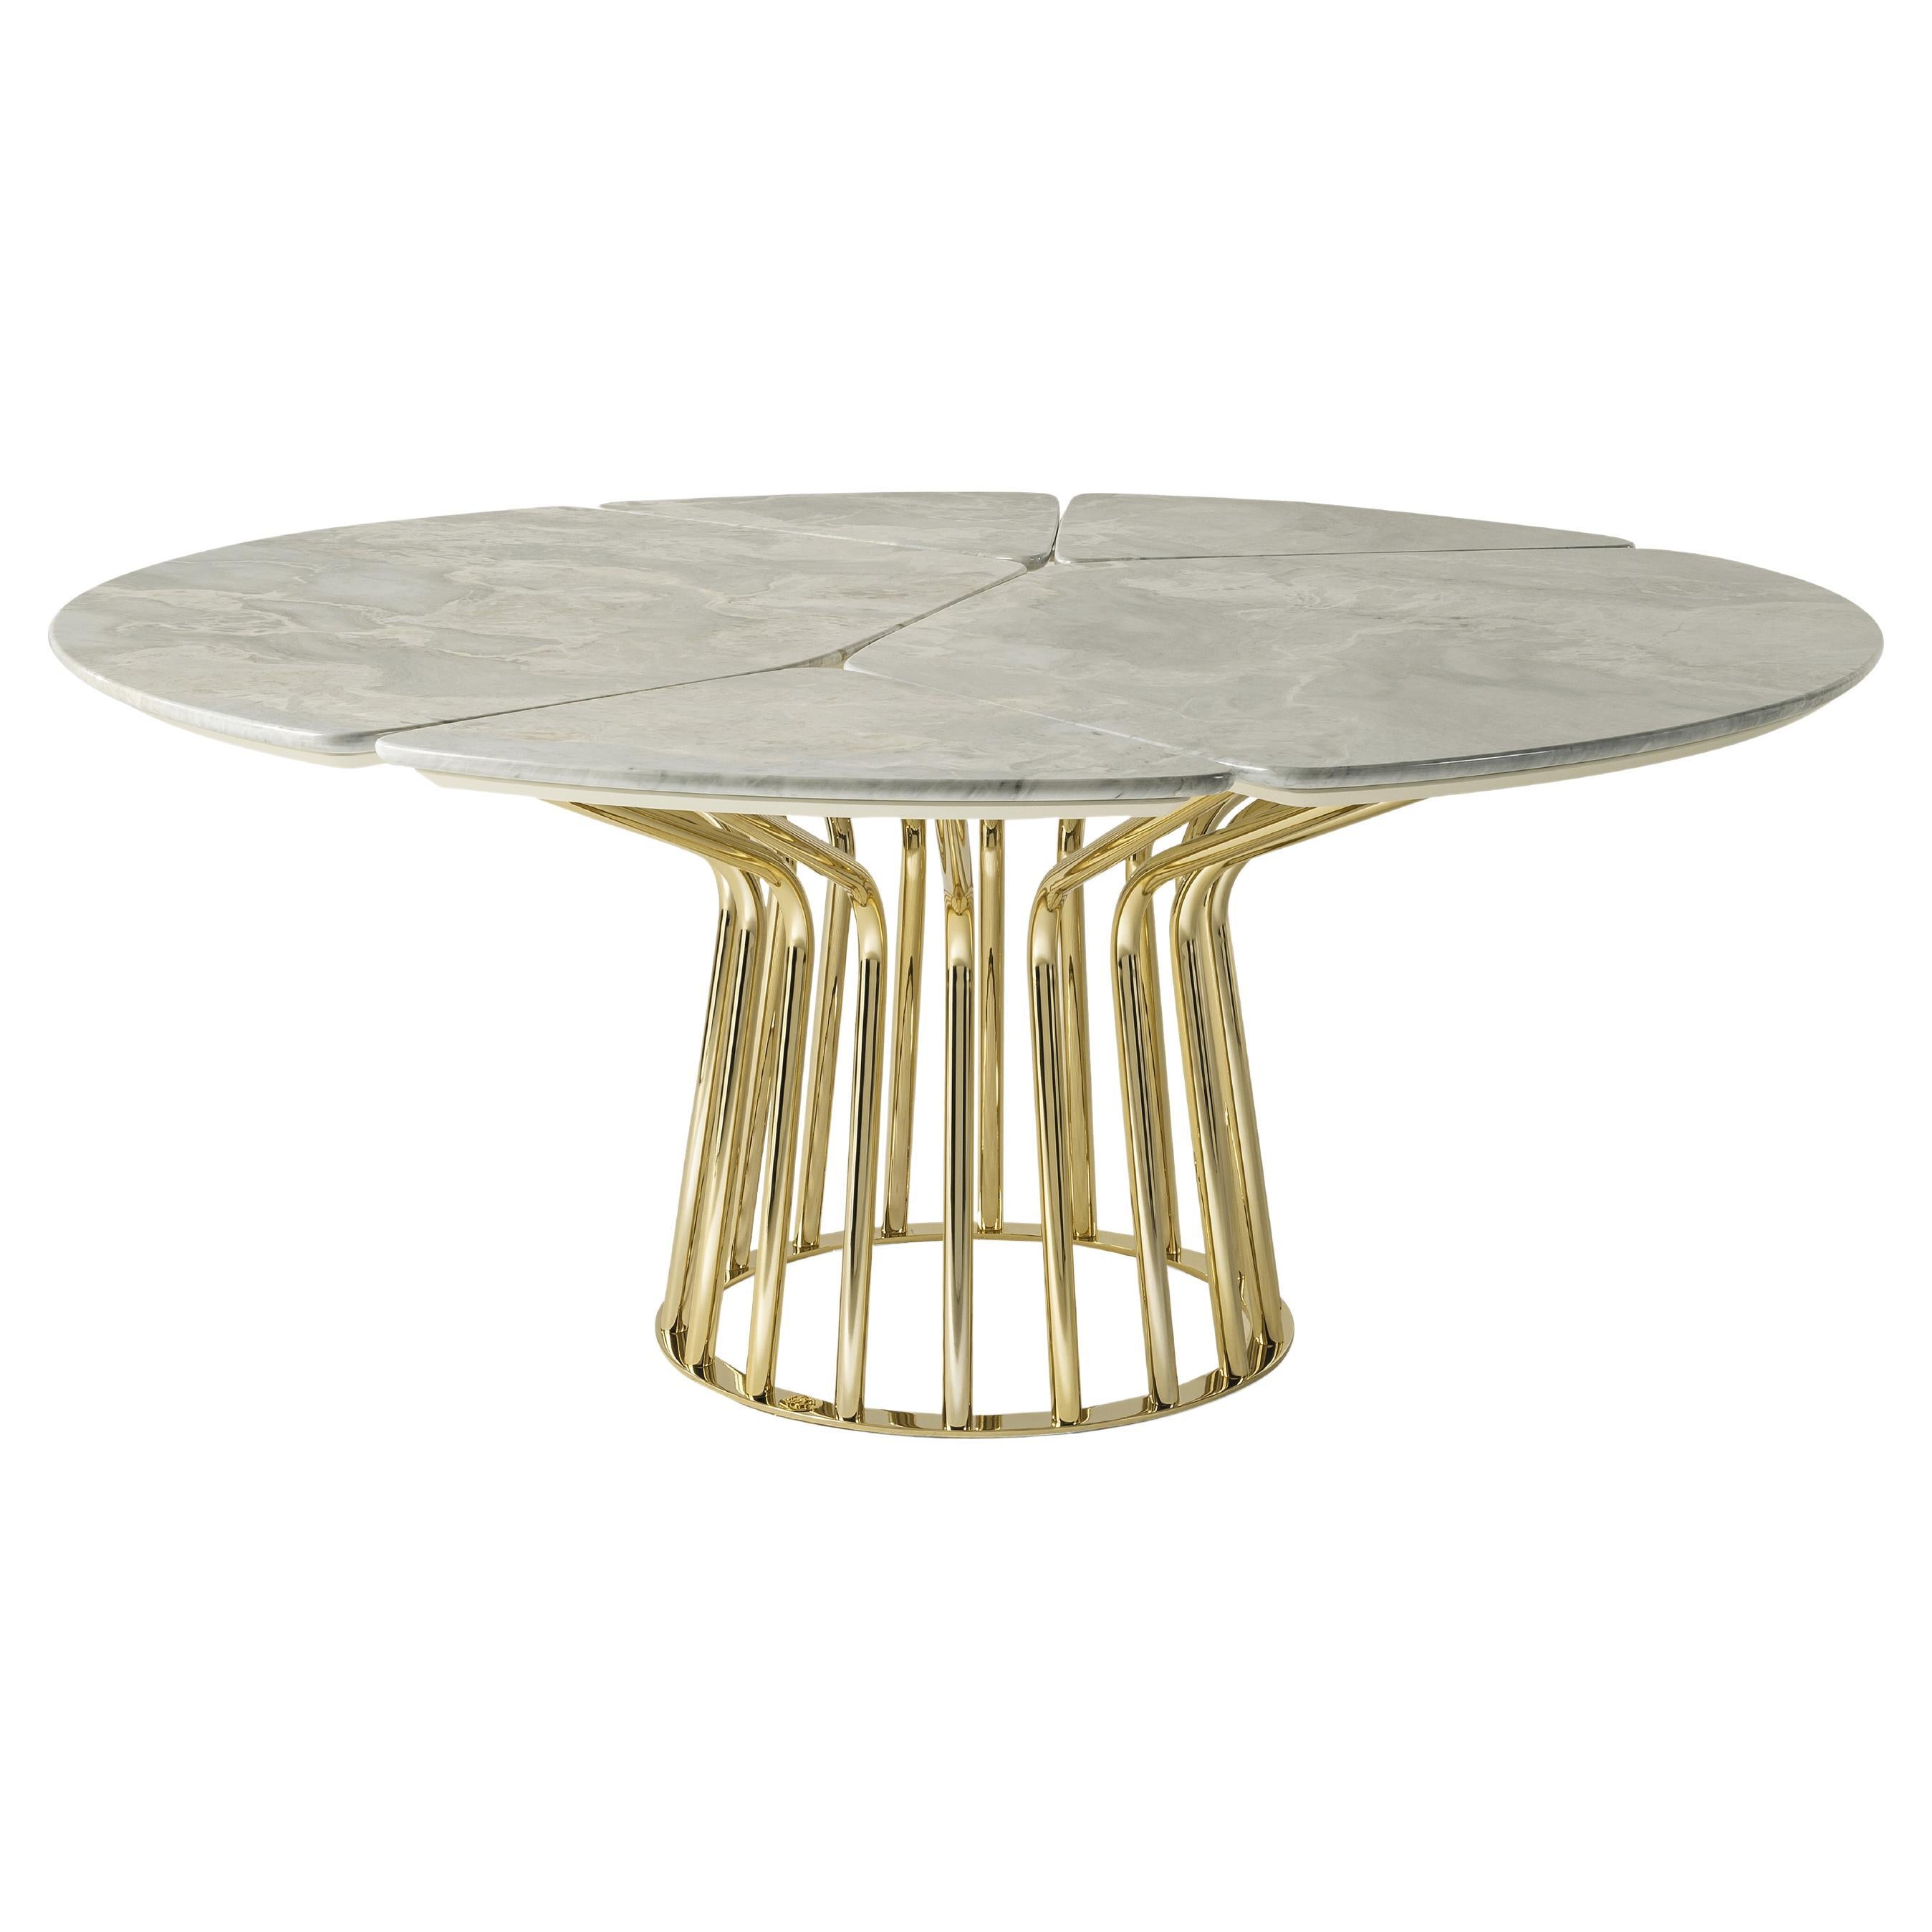 21st Century Baobab Table with Marble Top by Roberto Cavalli Home Interiors